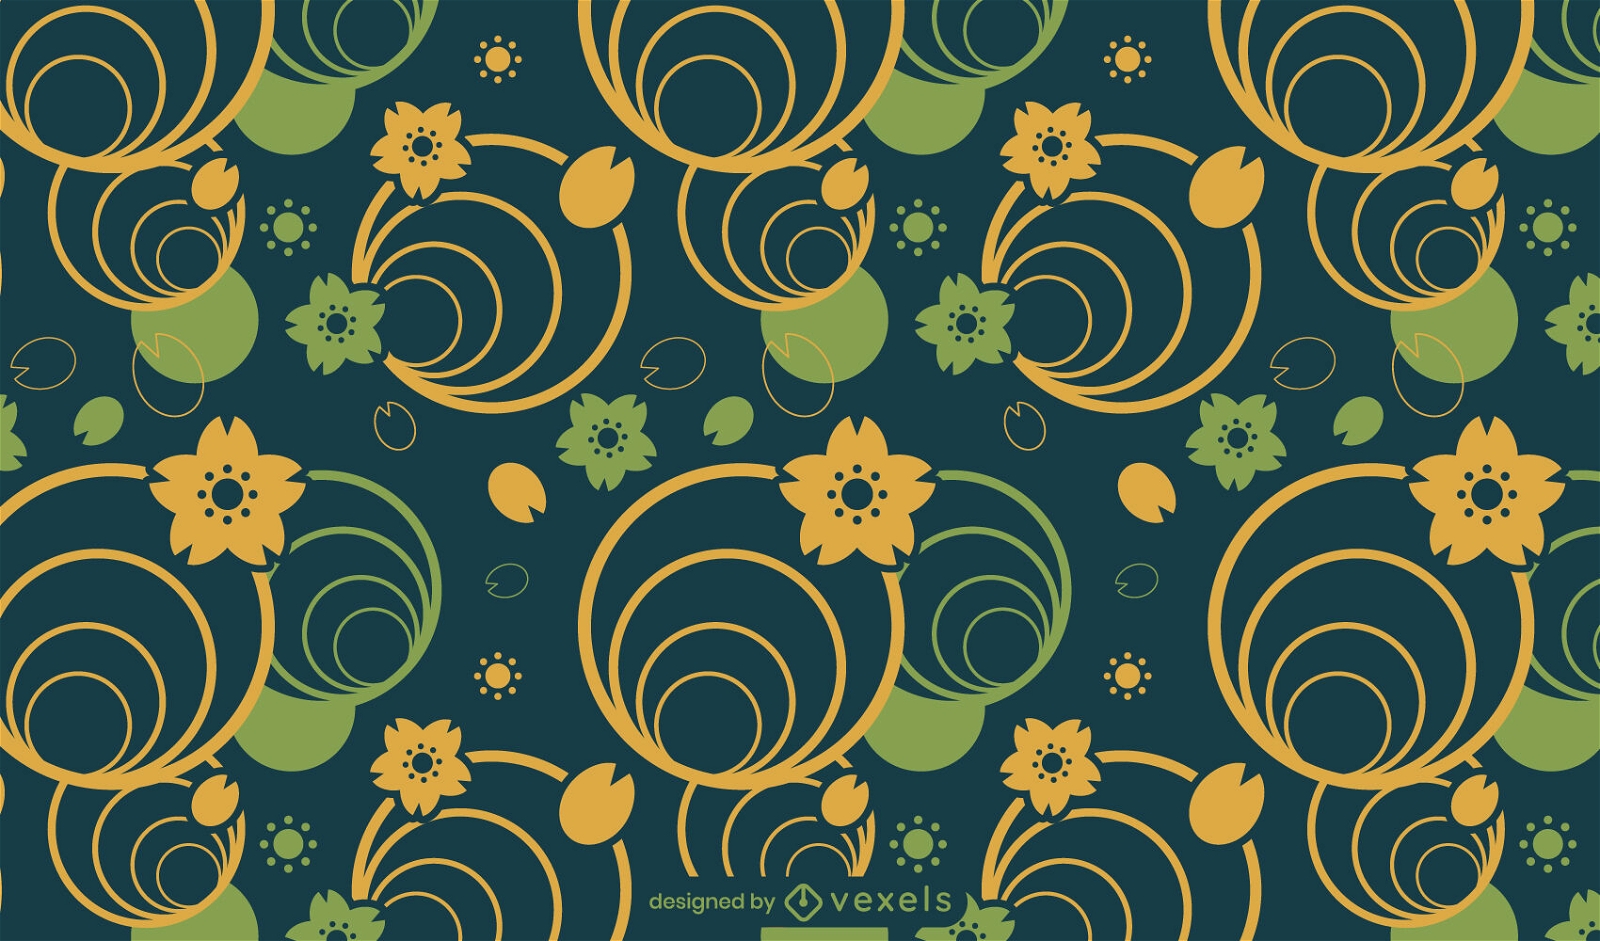 Flowers and geometric shapes pattern design